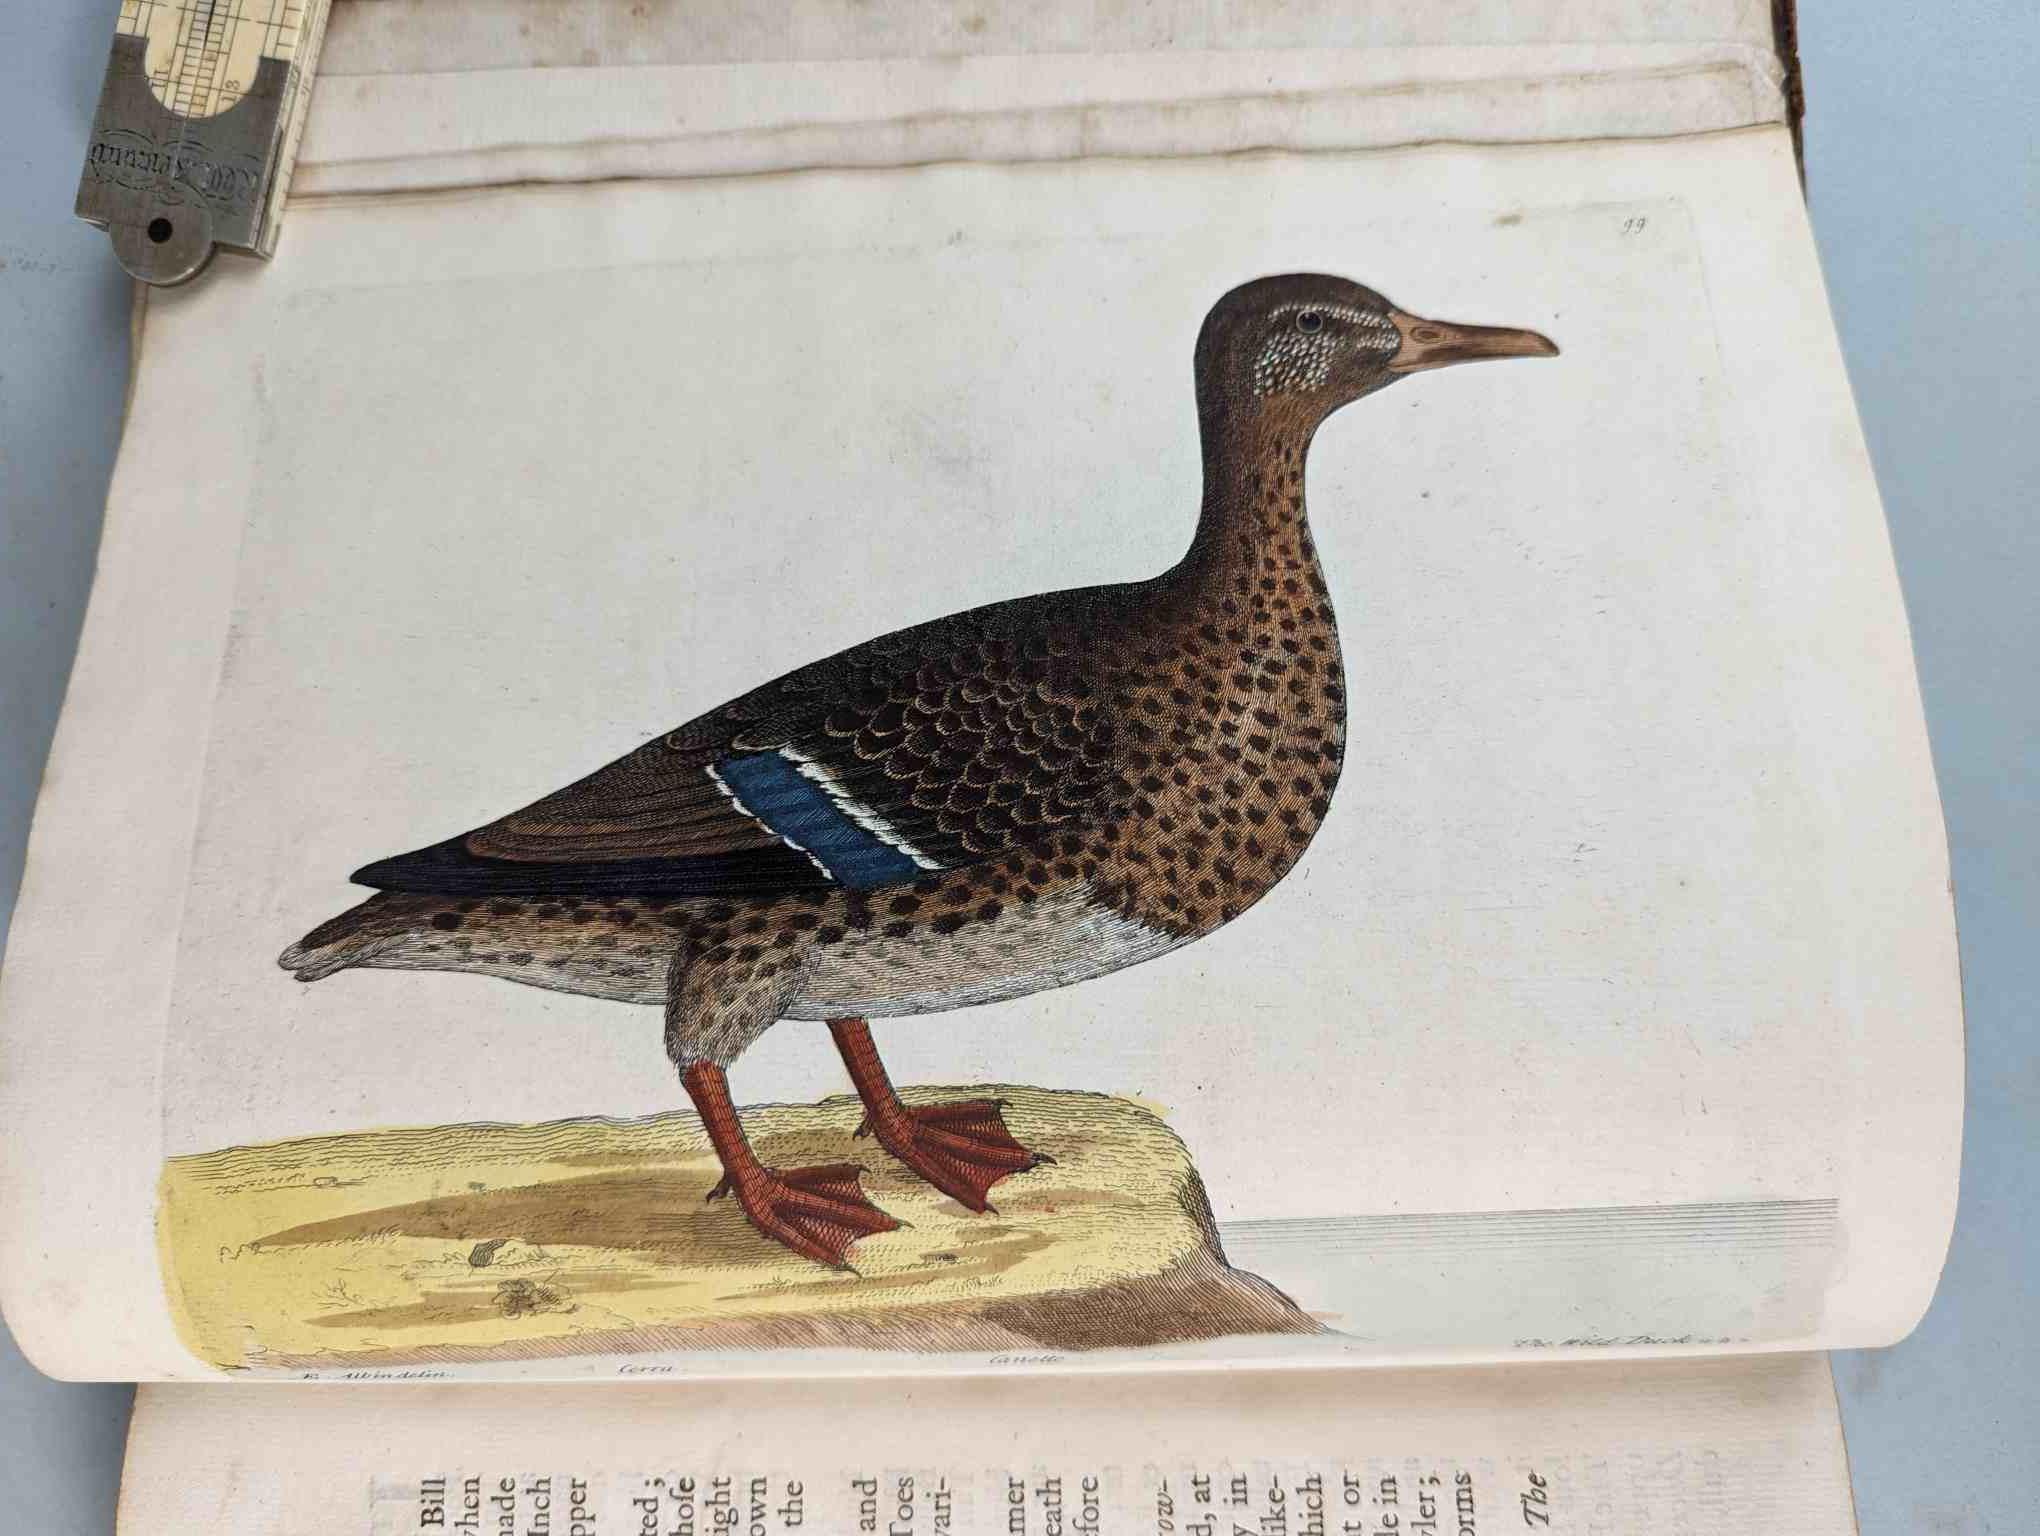 ALBIN, Eleazar. A Natural History of Birds, to which are added, Notes and Observations by W. - Image 102 of 208